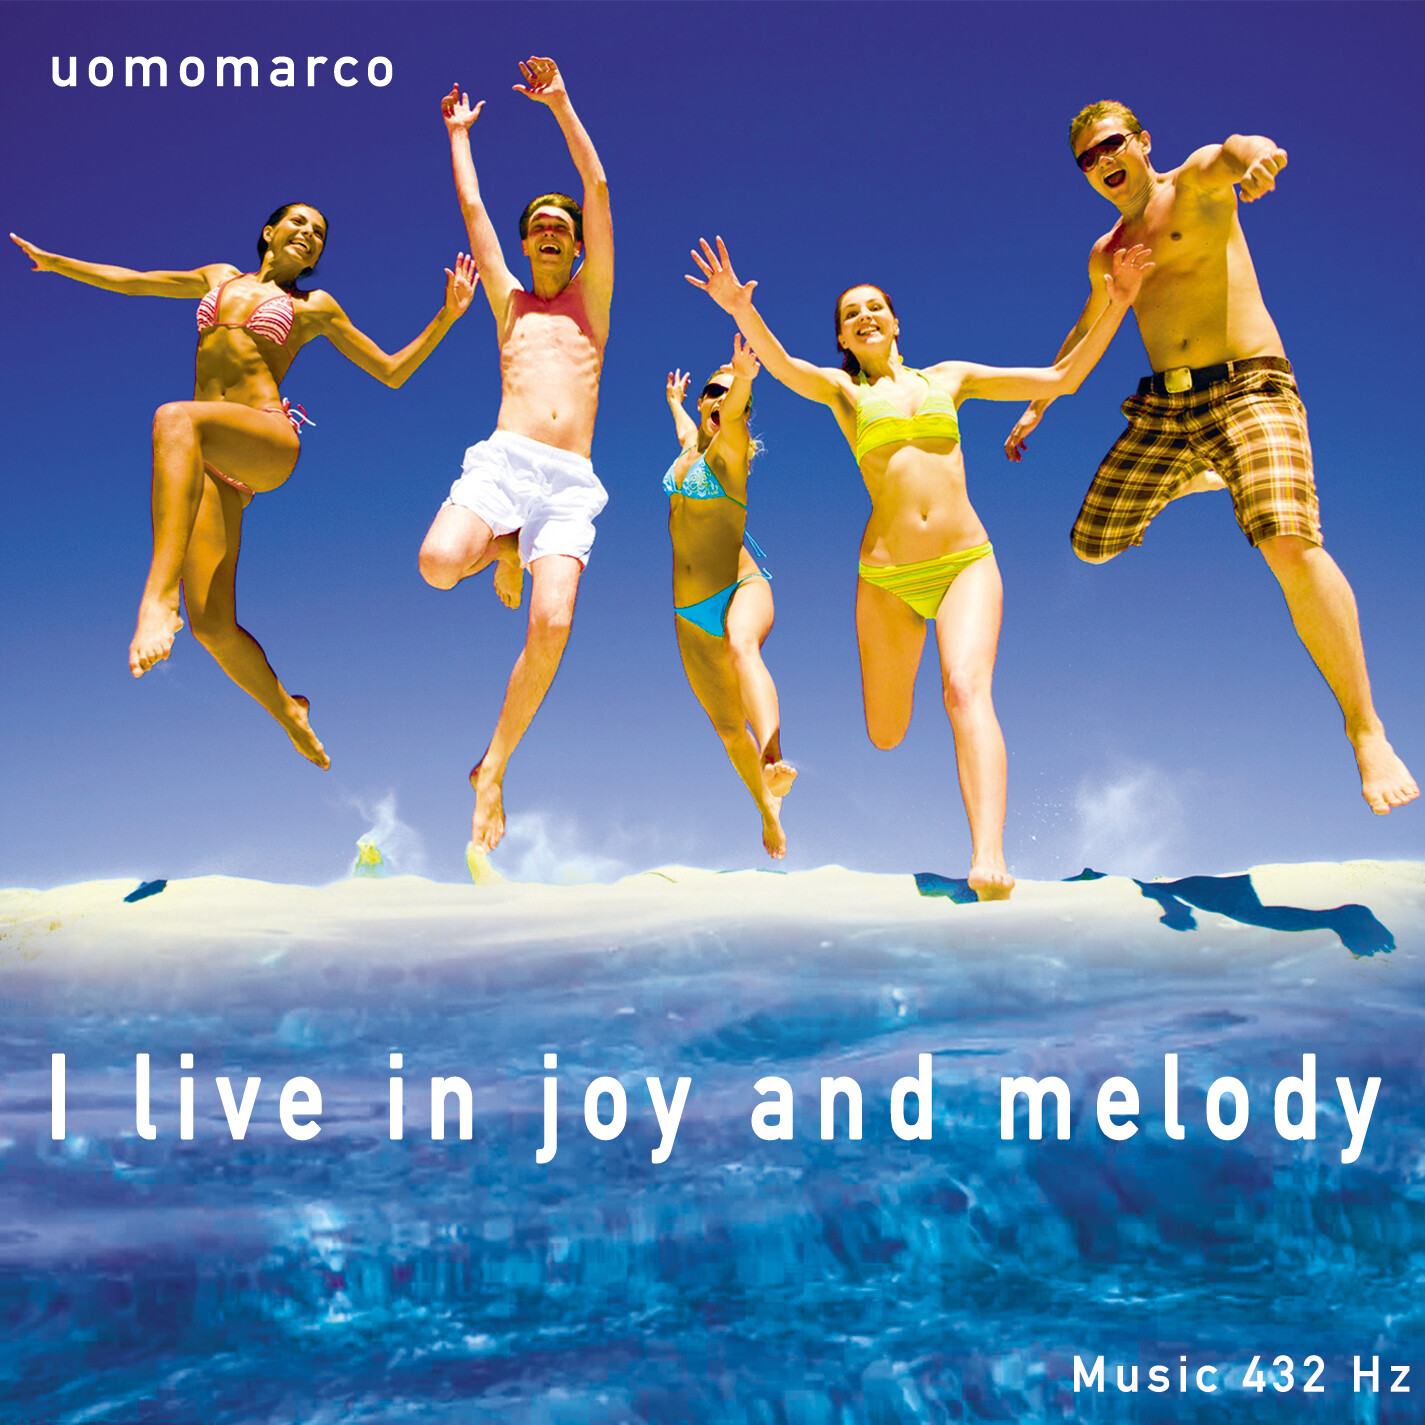 I live in joy and melody - Album